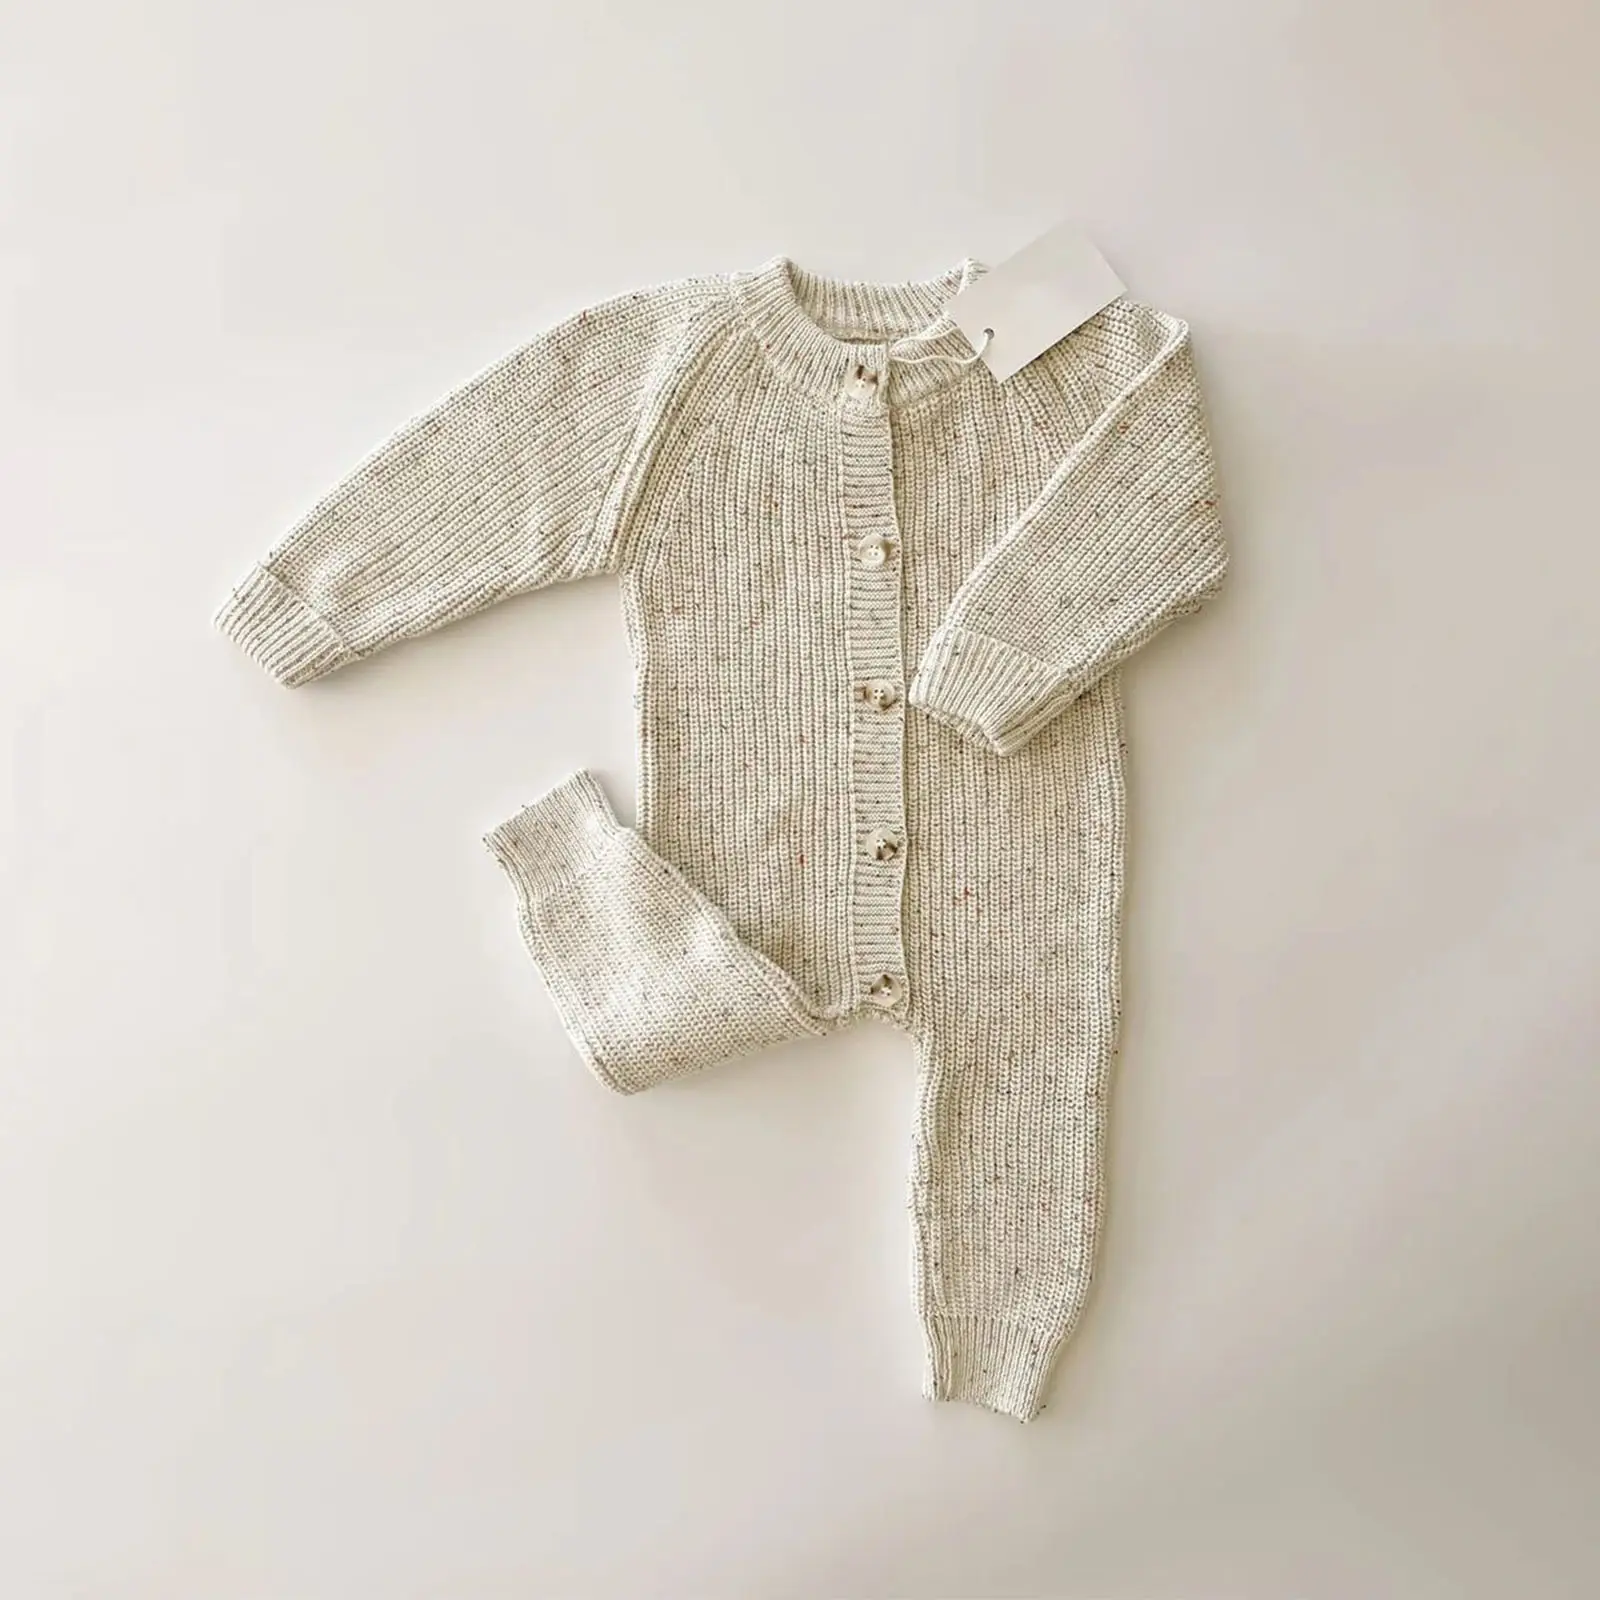 Oem Winter Fall Newborn Knit Jumpsuit Infant Knitted baby sweater rompers overalls Custom organic cotton baby clothes 0-3month